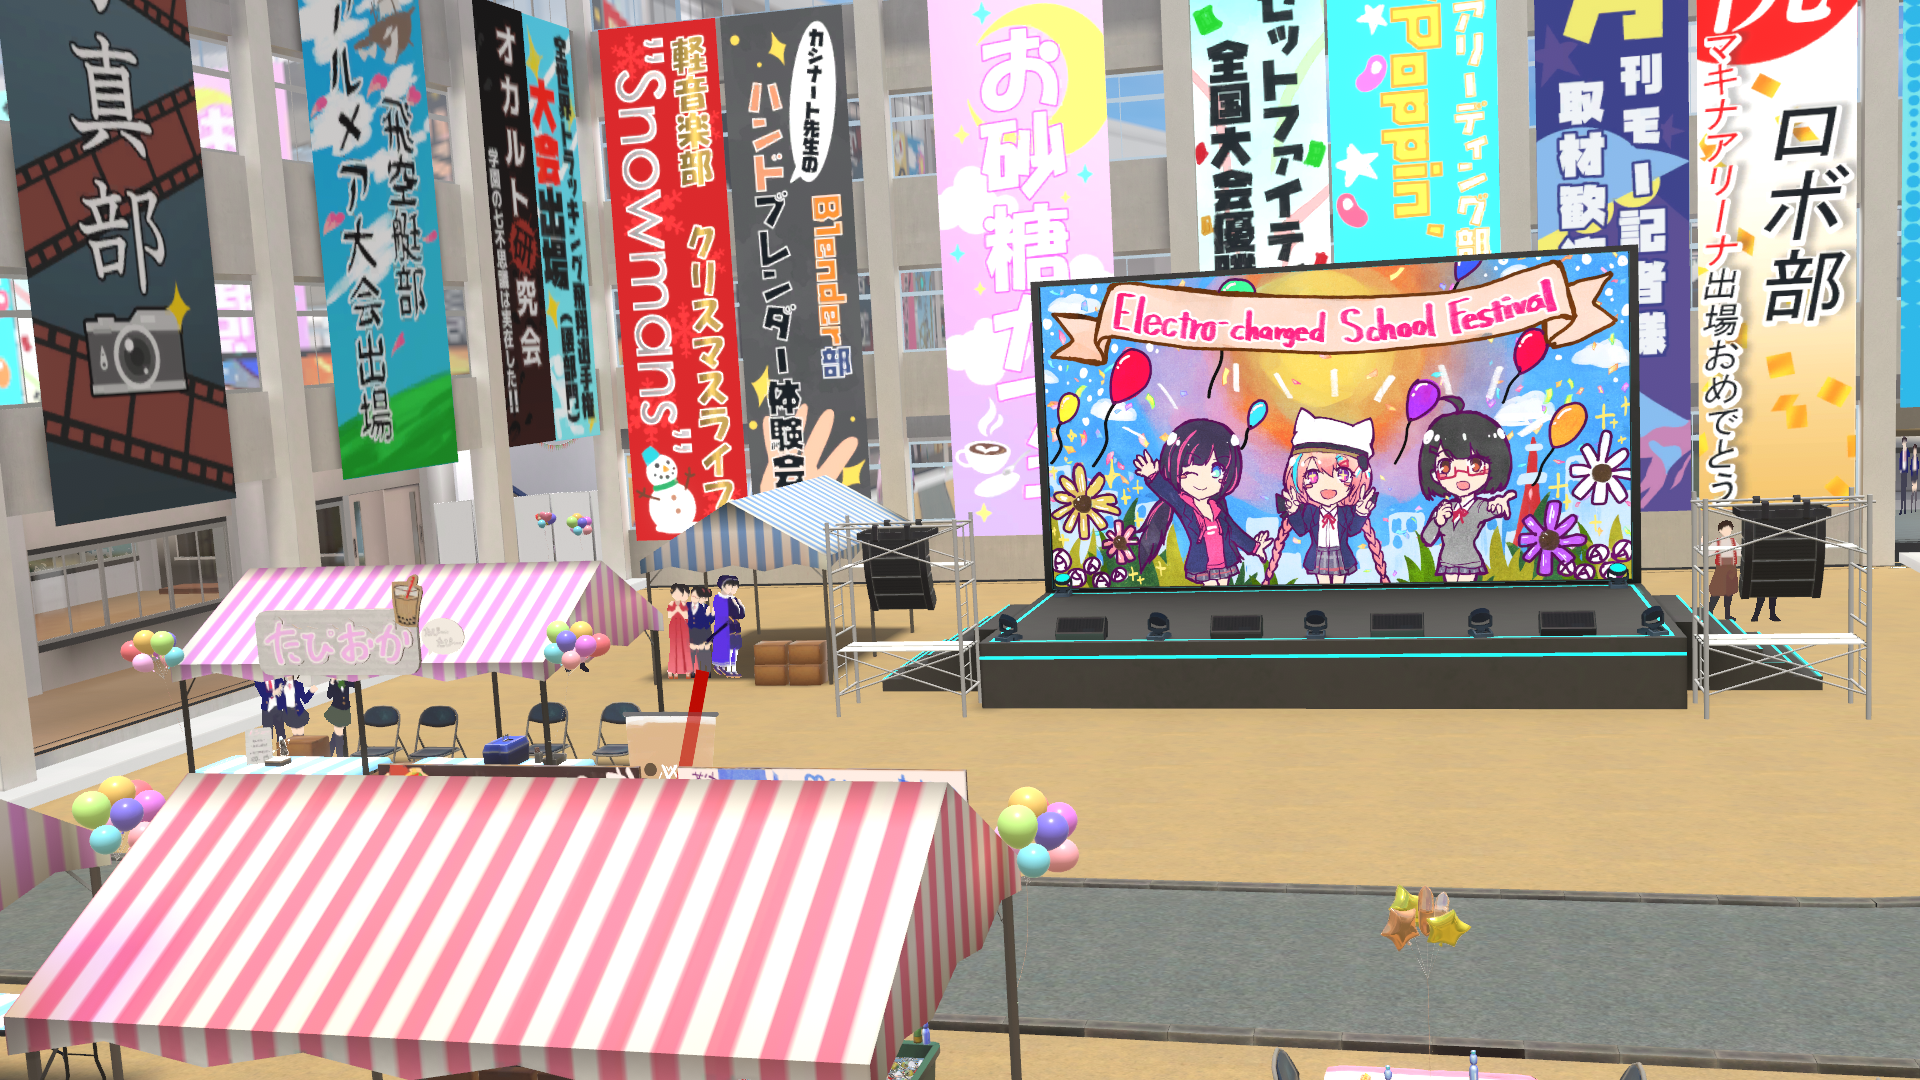 VRChat_1920x1080_2021-12-05_01-33-21.569.png